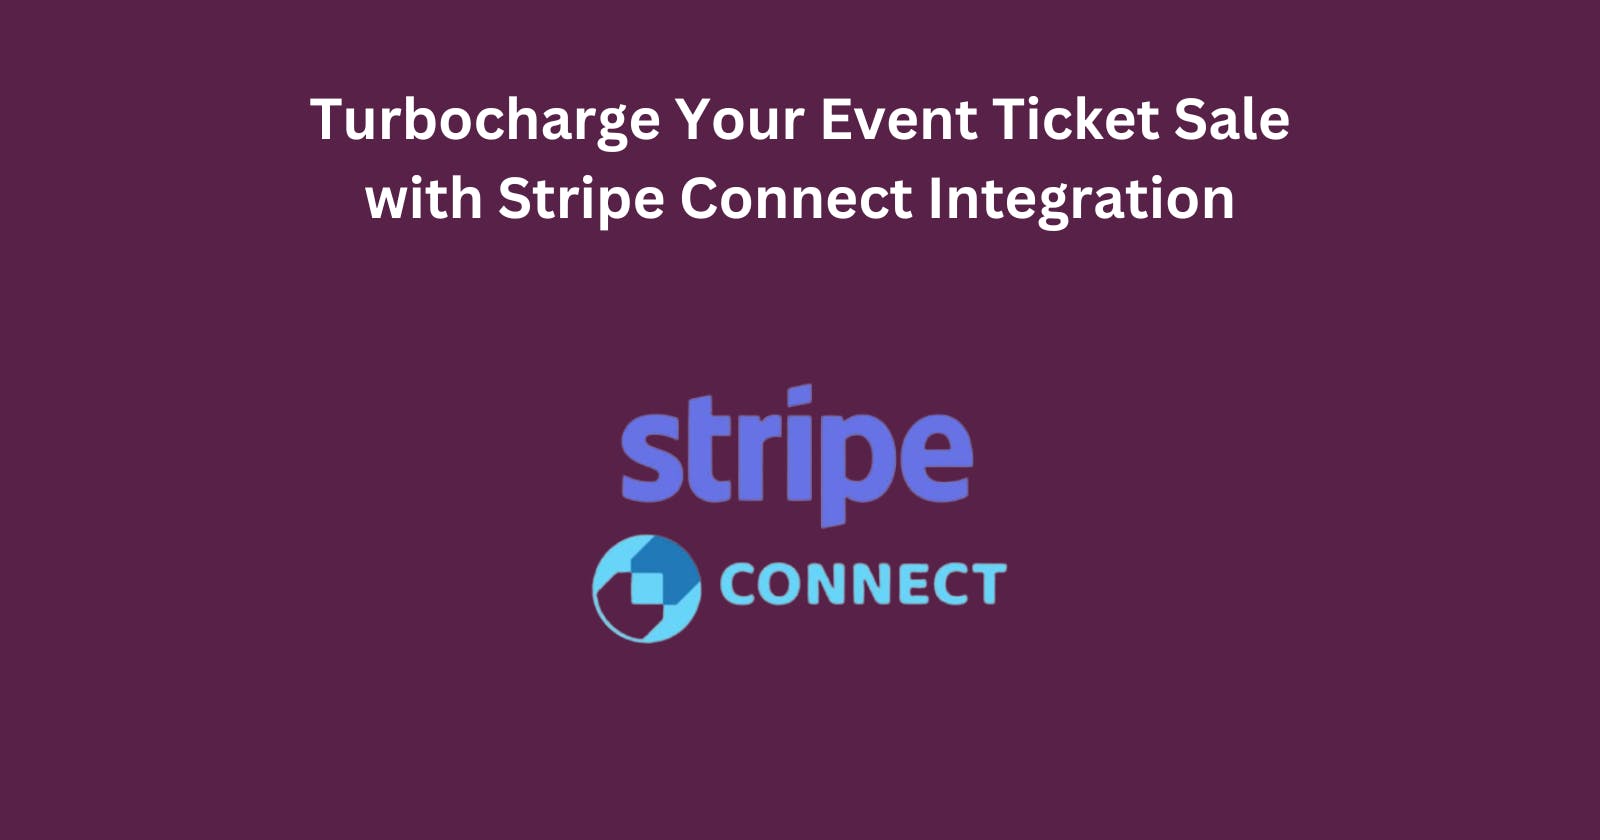 Turbocharge Your Event Ticket Sale with Stripe Connect Integration